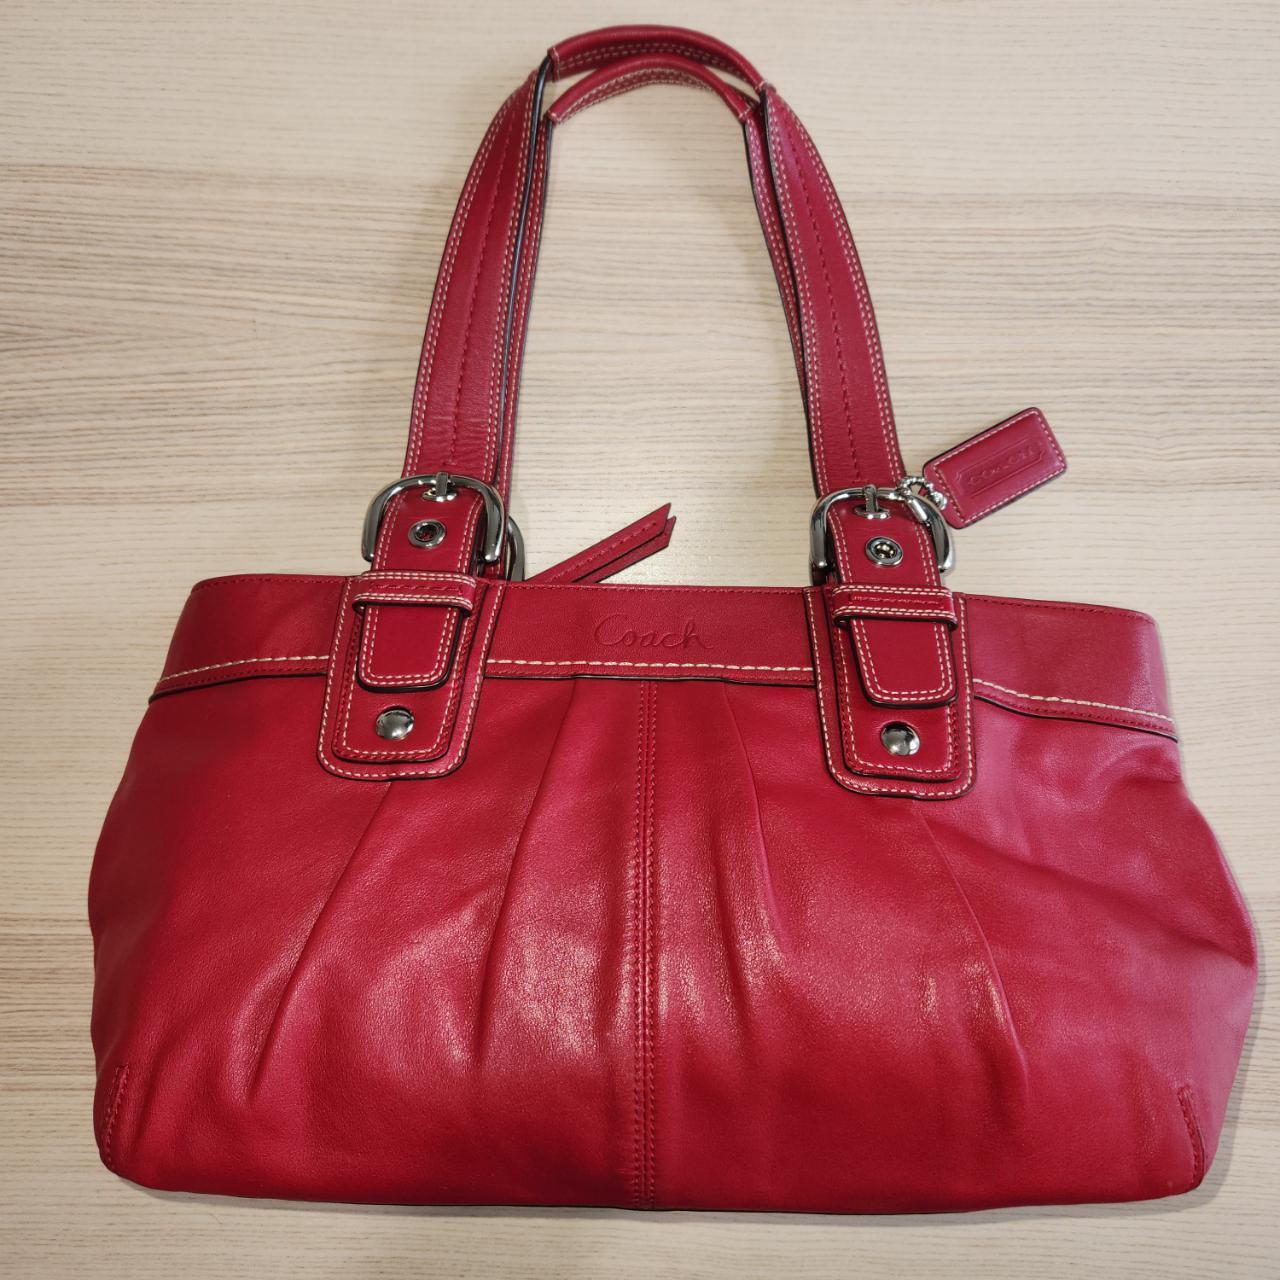 Colorado Vintage /Rare Find/ Coach Station Style Super Cute Red Leather Crossbody  Handbag - RRP $399.00 (s)